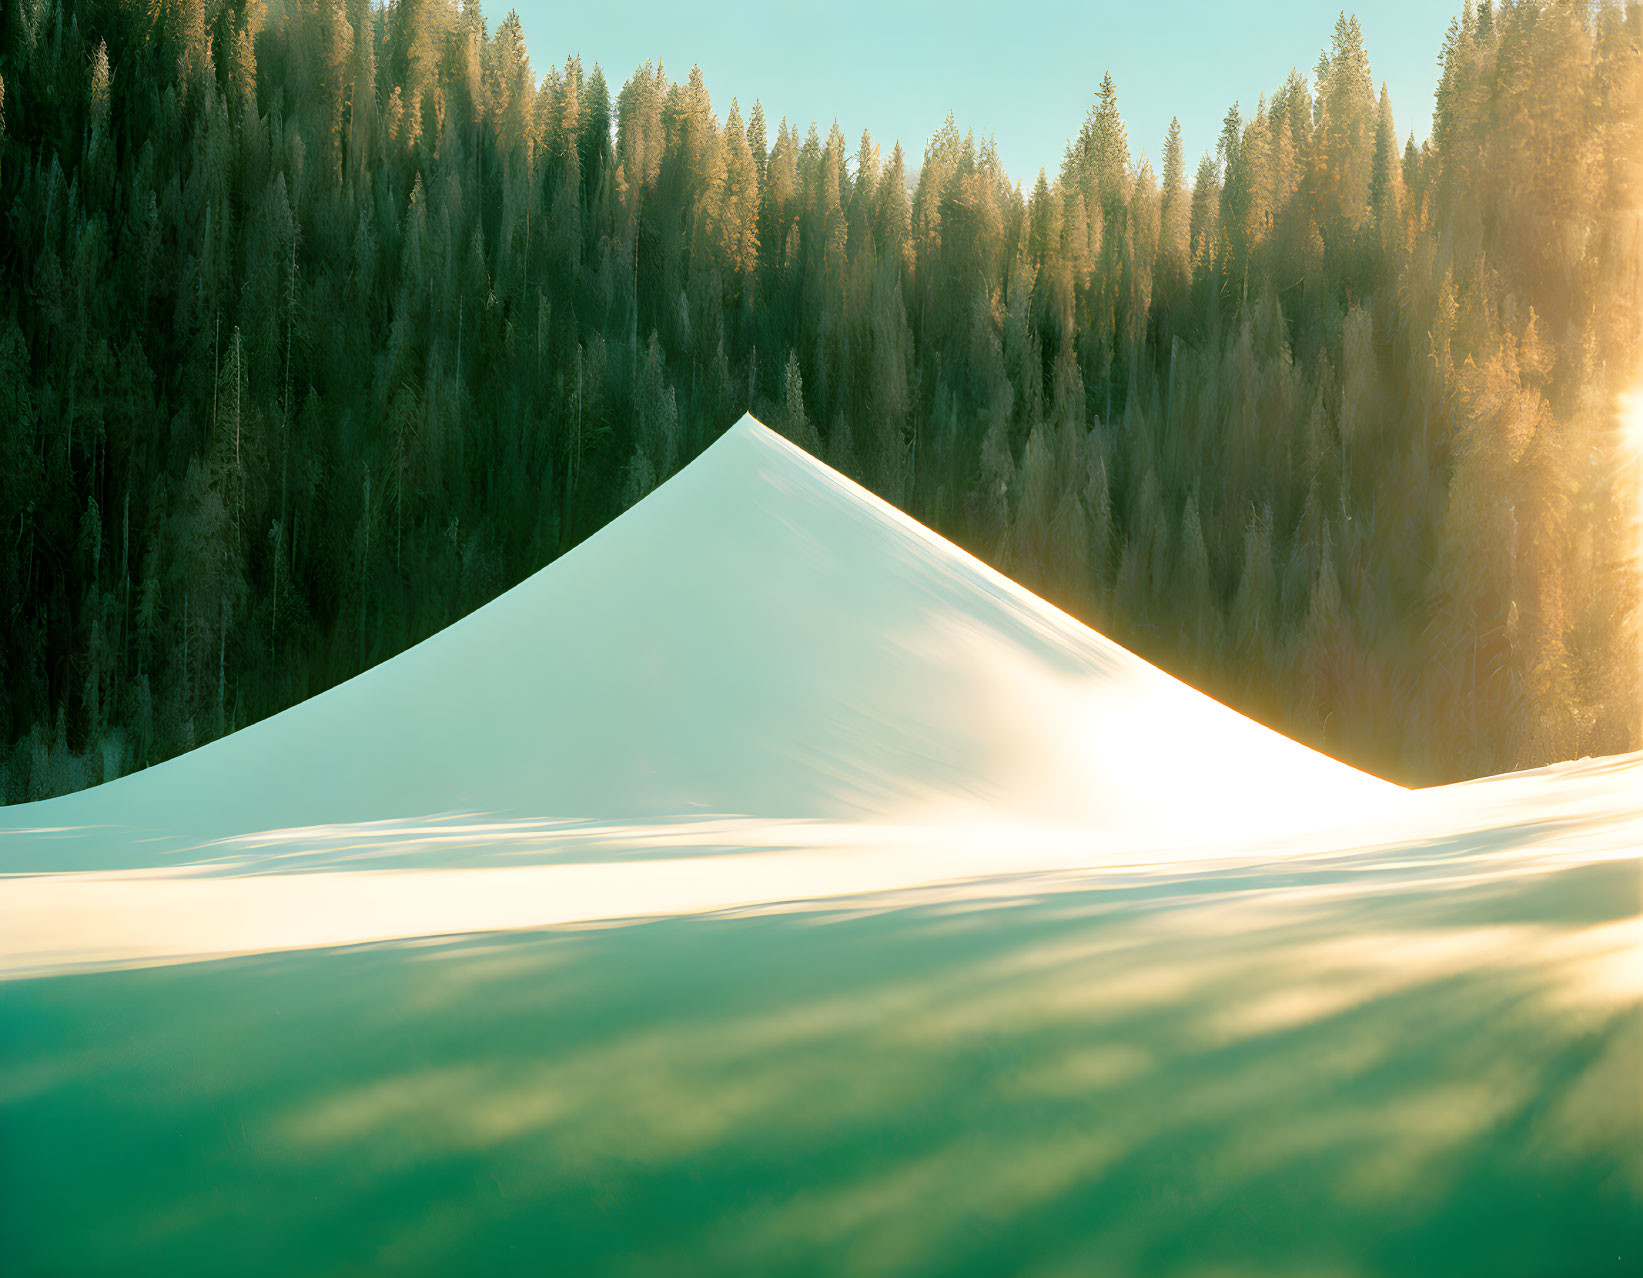 Snow-covered hill with coniferous forest under warm sunlight